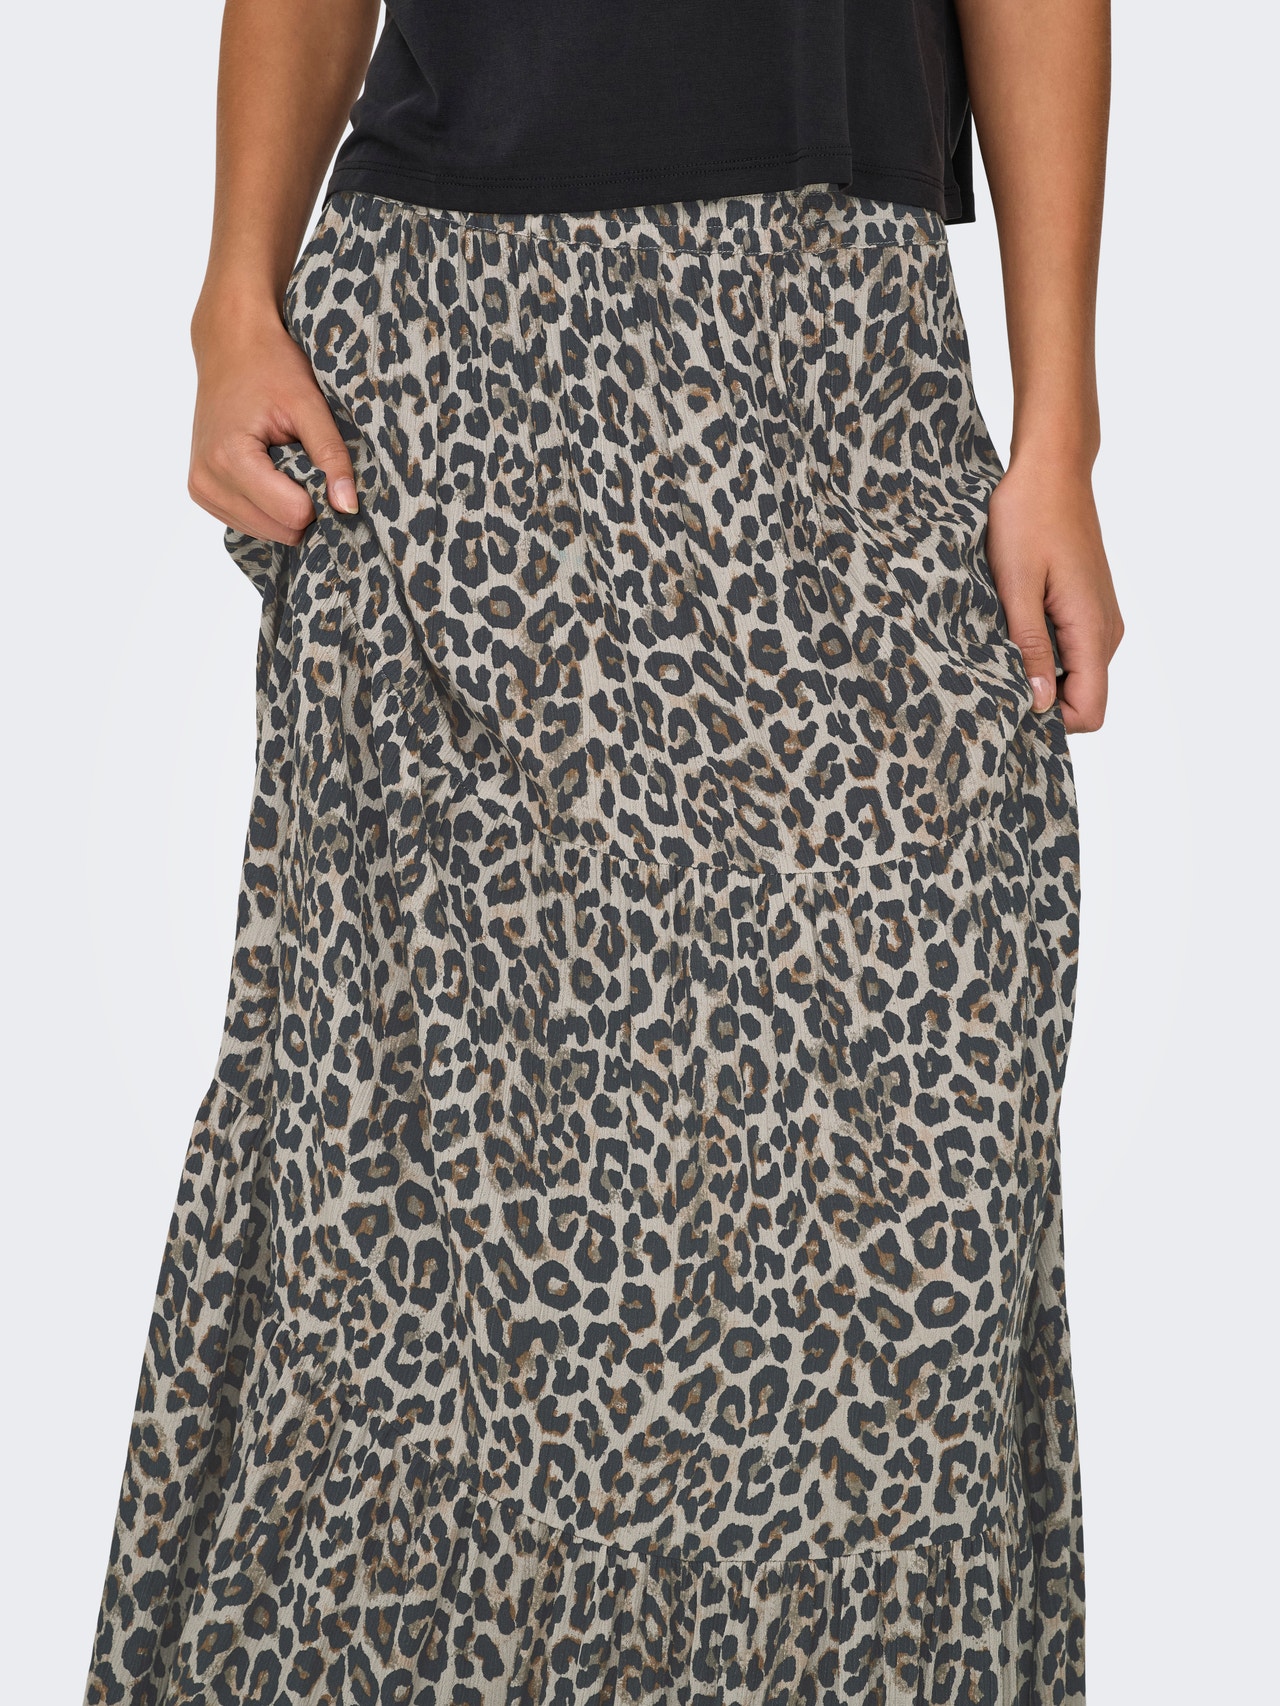 ONLY Long skirt with leopard print -Pumice Stone - 15343230